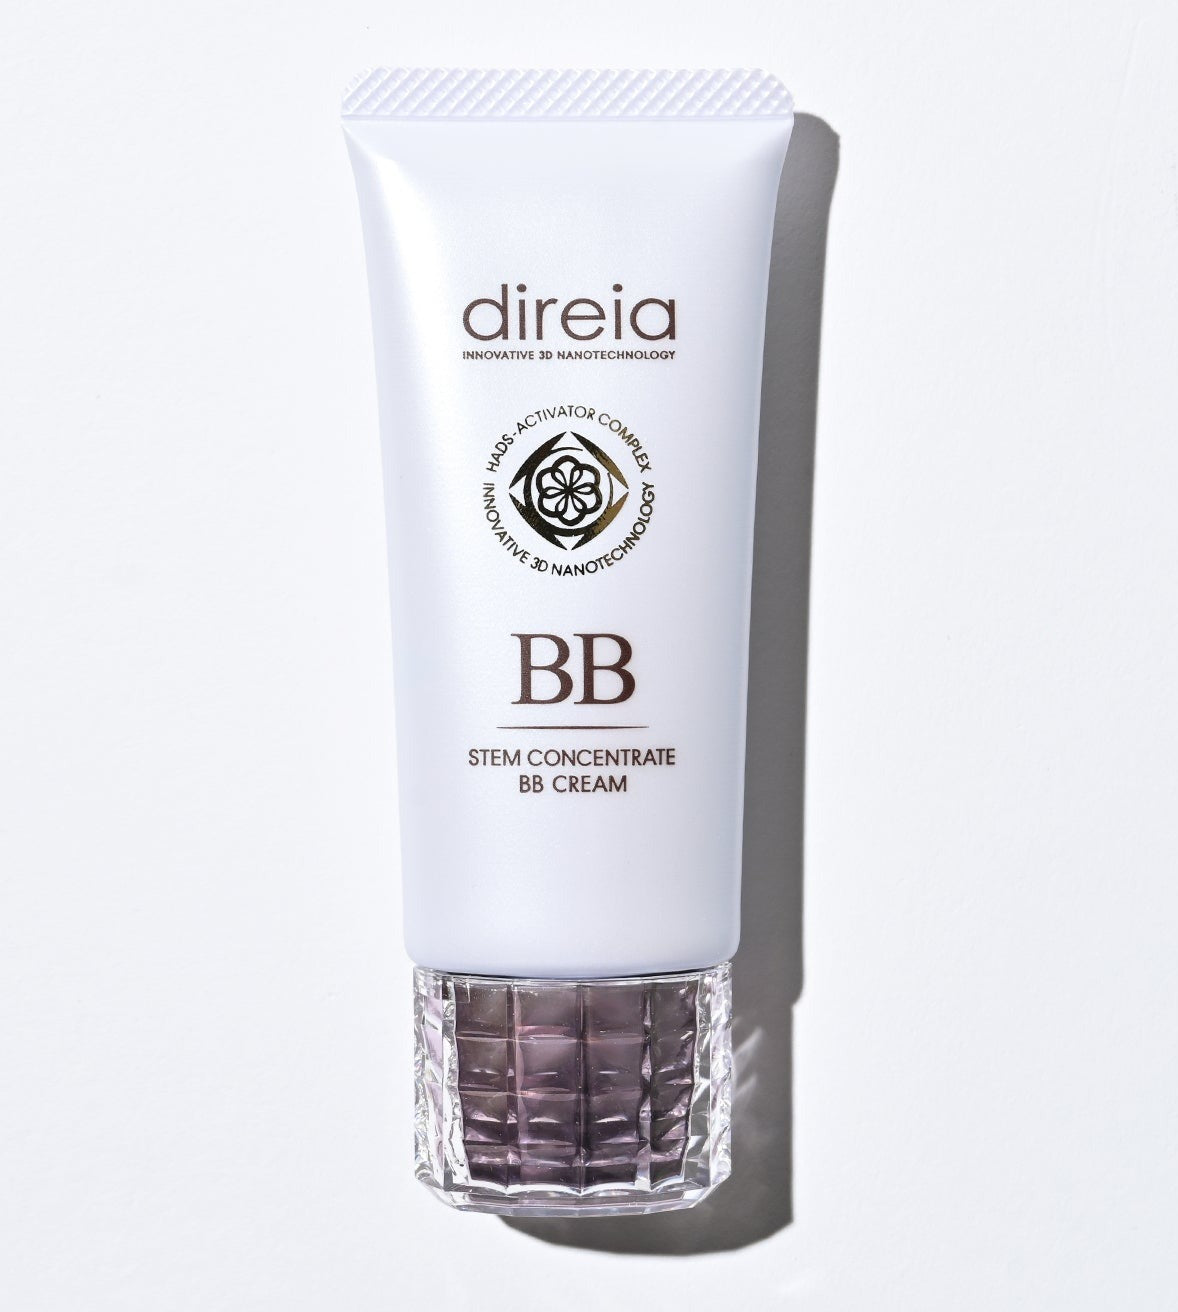 STEM CONCENTRATE BB CREAM 40g YELLOW